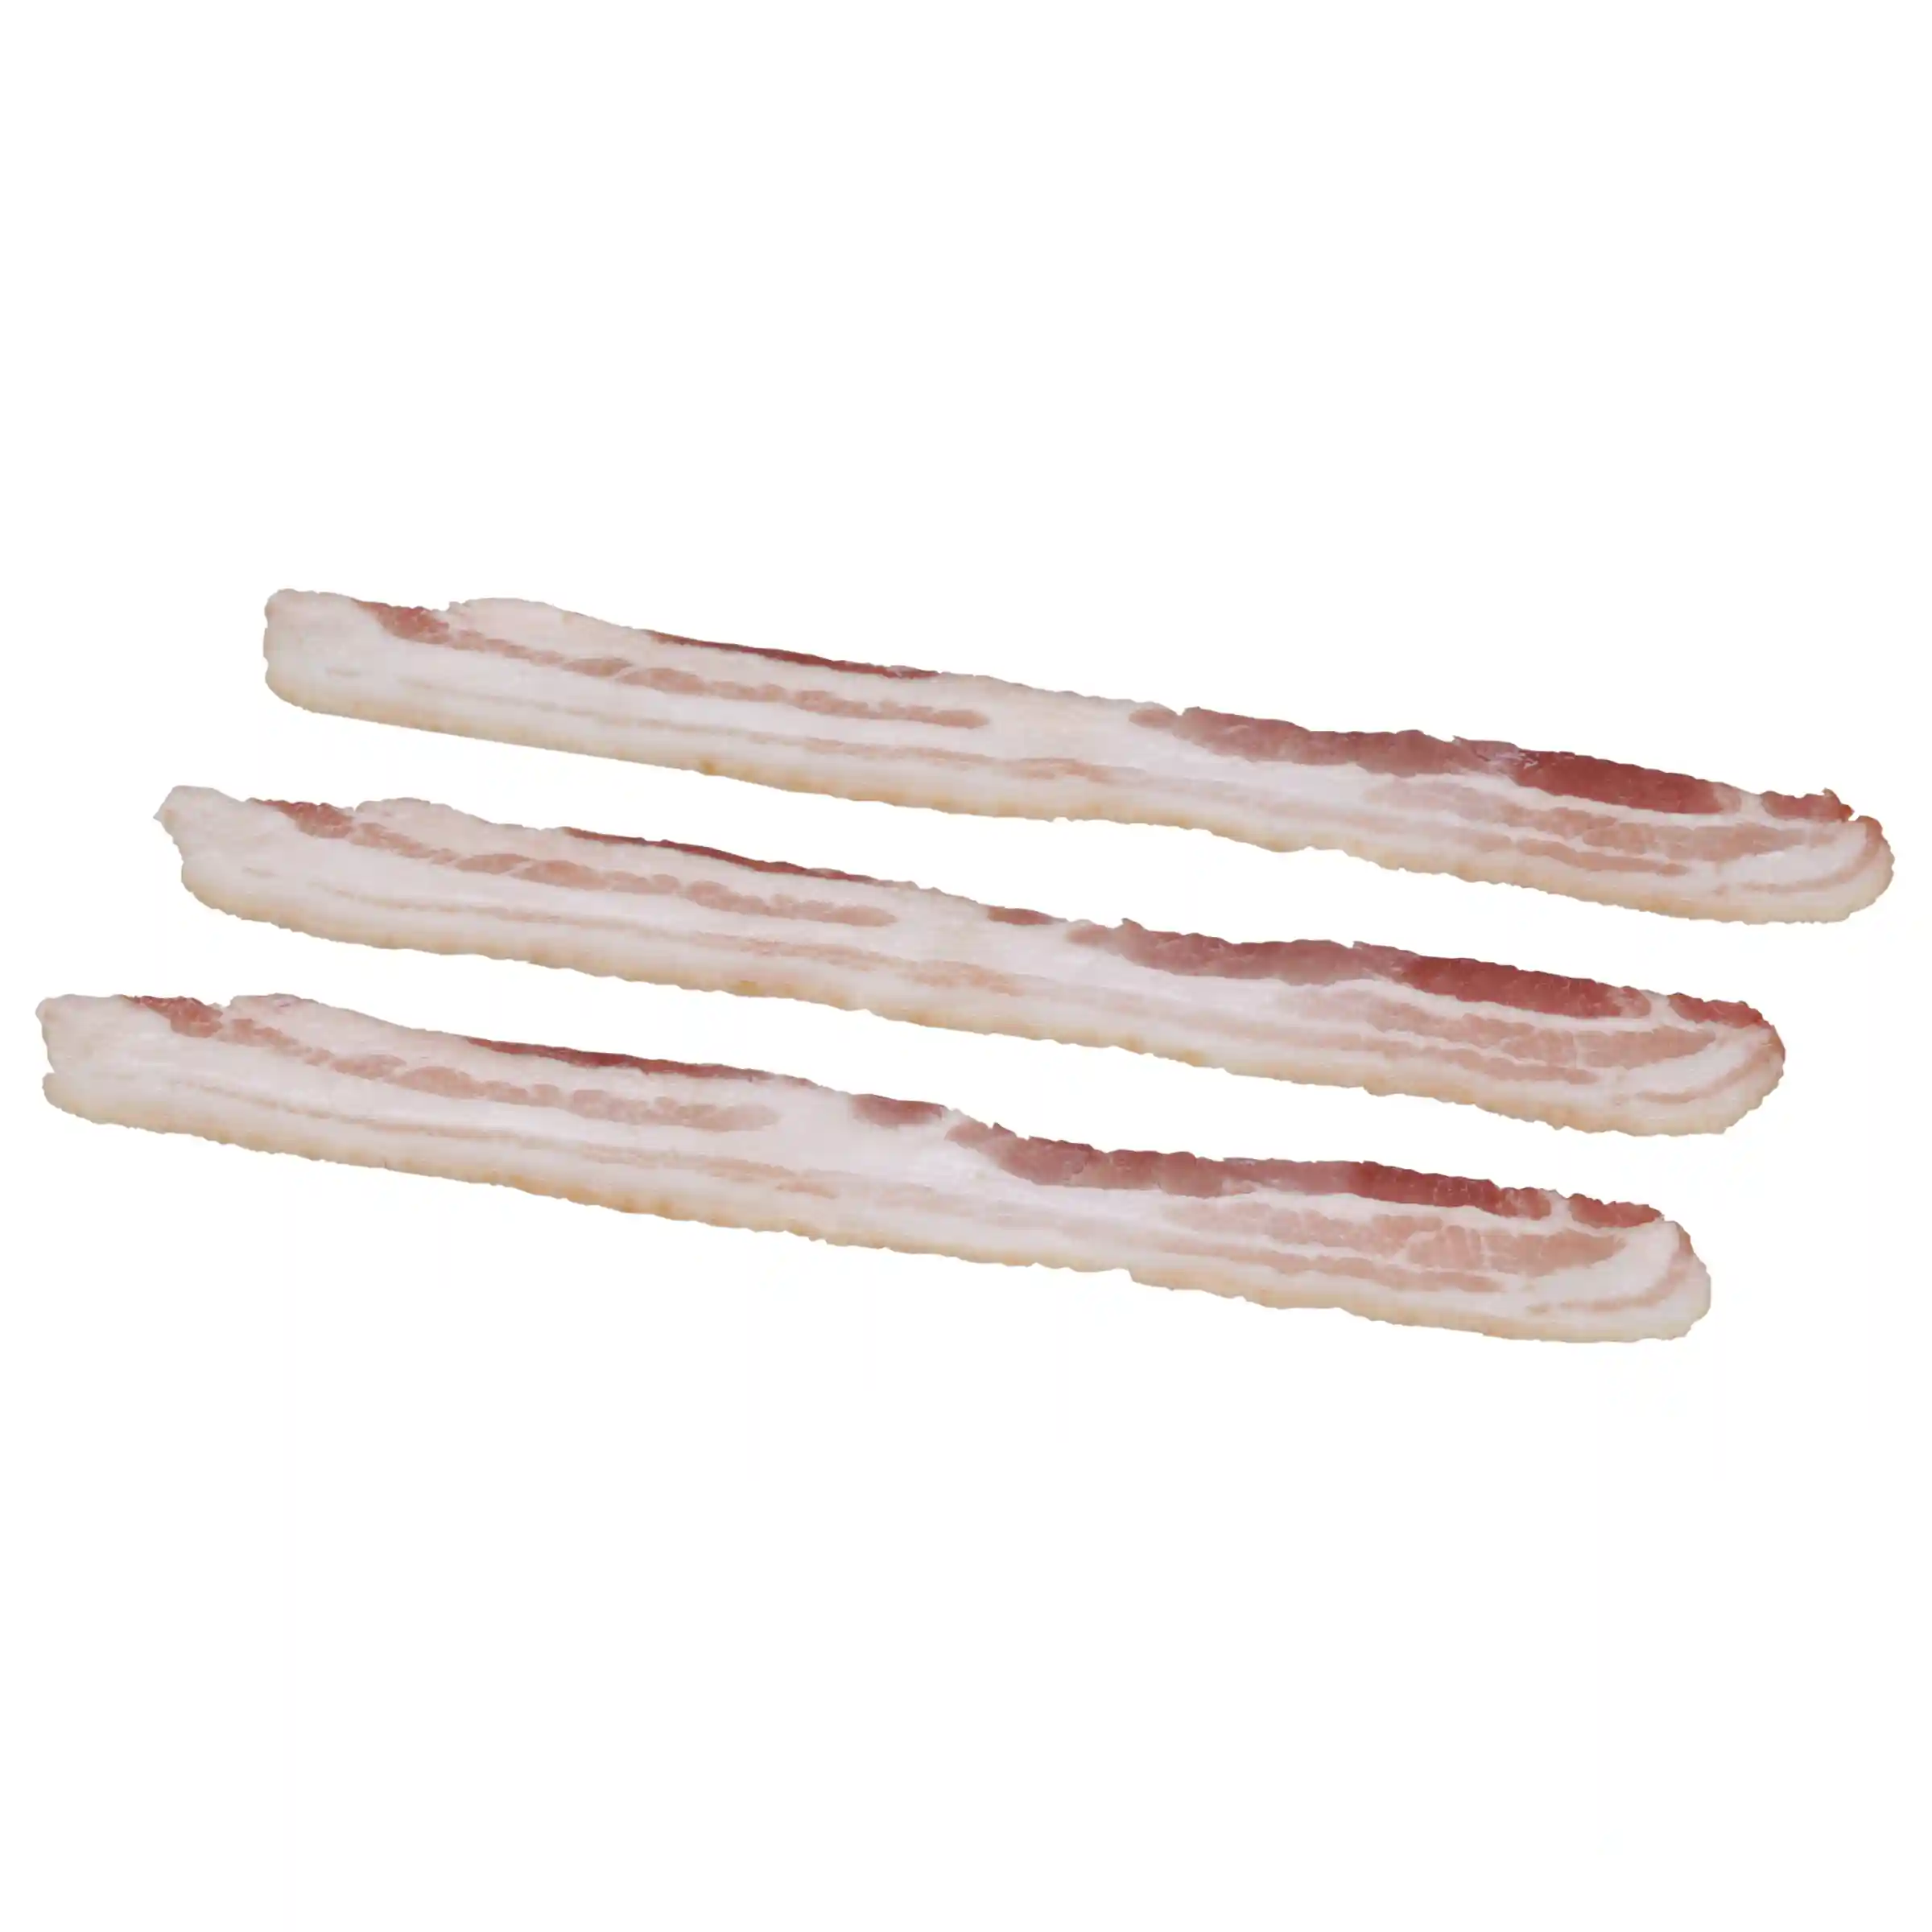 Wright® Brand Naturally Hickory Smoked Thick Sliced Bacon, Bulk, 15 Lbs, 10-14 Slices Per Pound, Gas Flushed_image_11